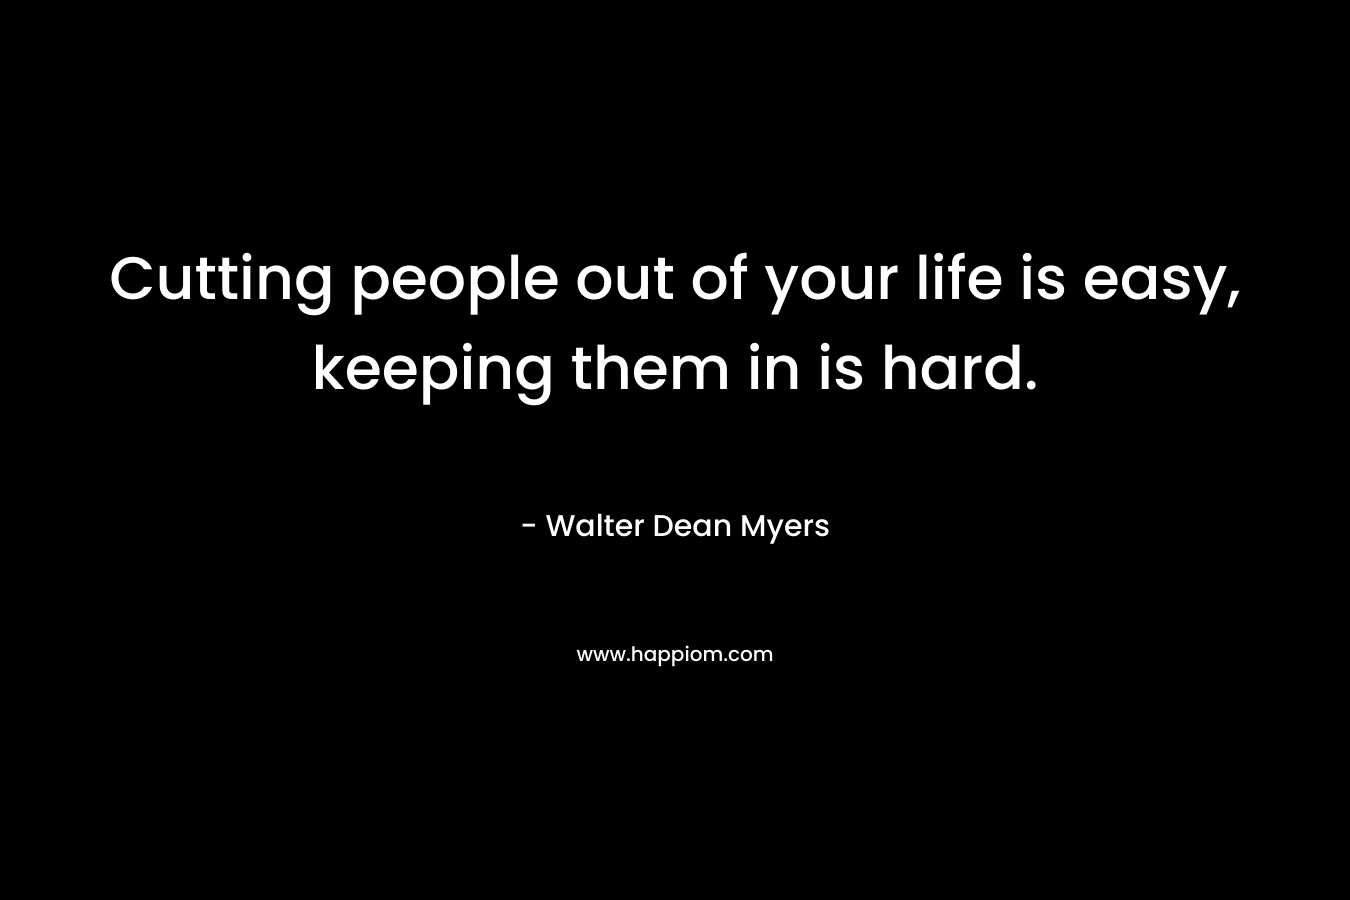 Cutting people out of your life is easy, keeping them in is hard. – Walter Dean Myers